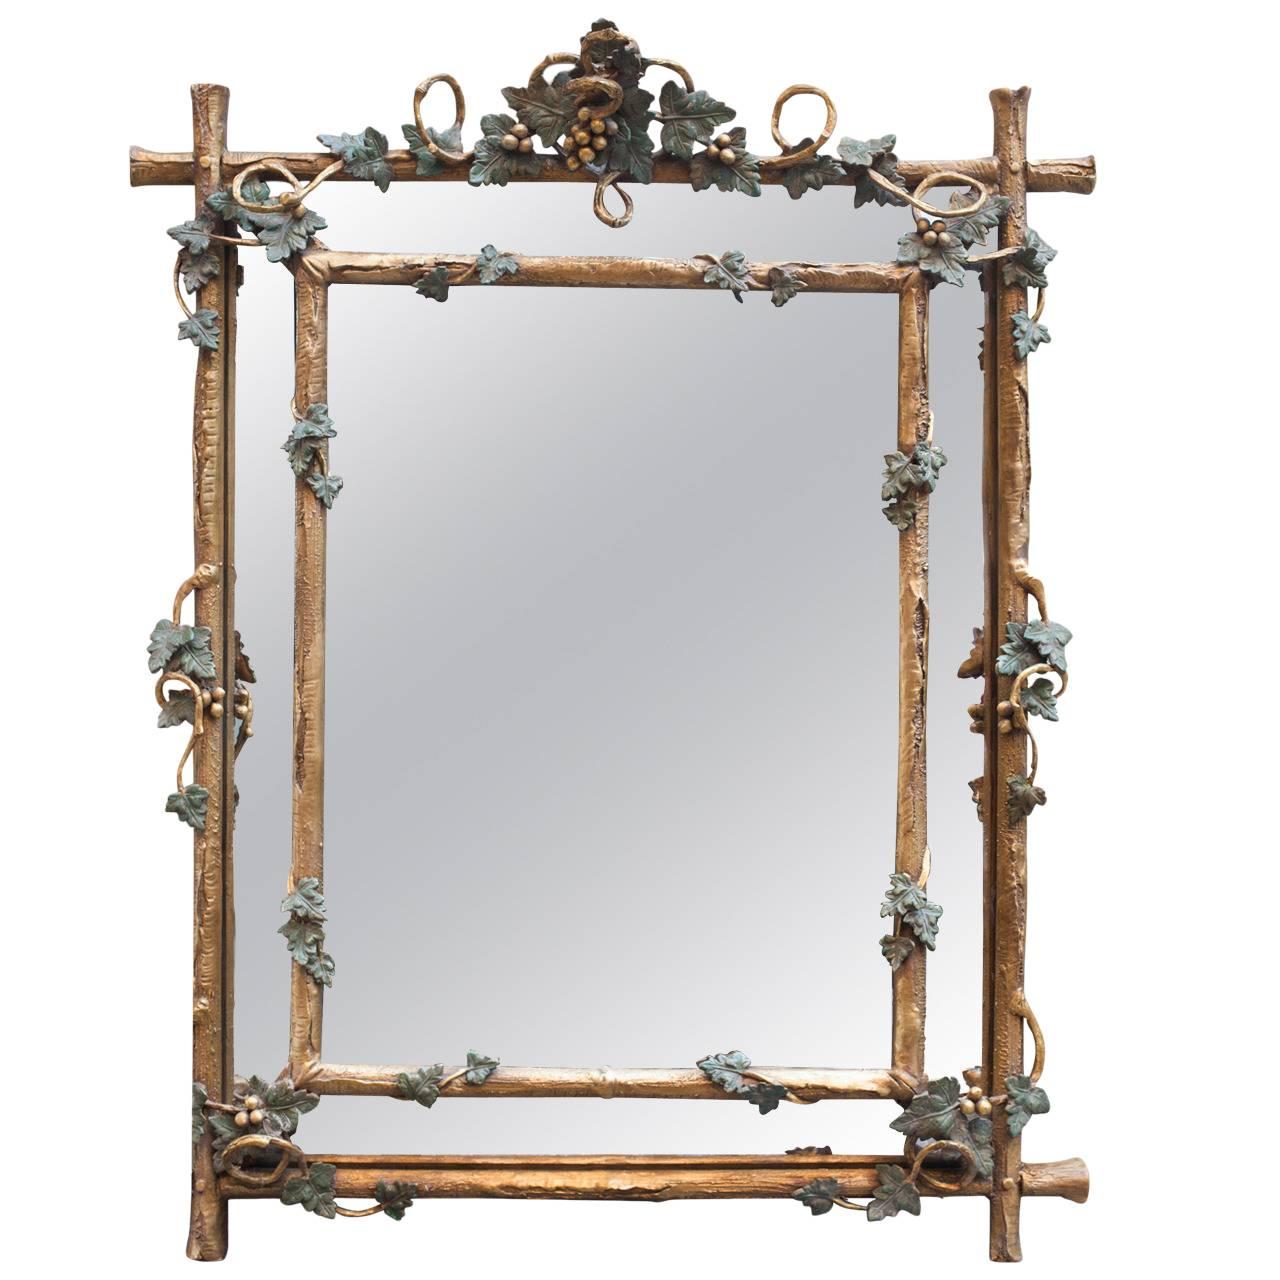  Cushion Style Gilt Mirror in a Naturalistic Style-Period Napoleon III